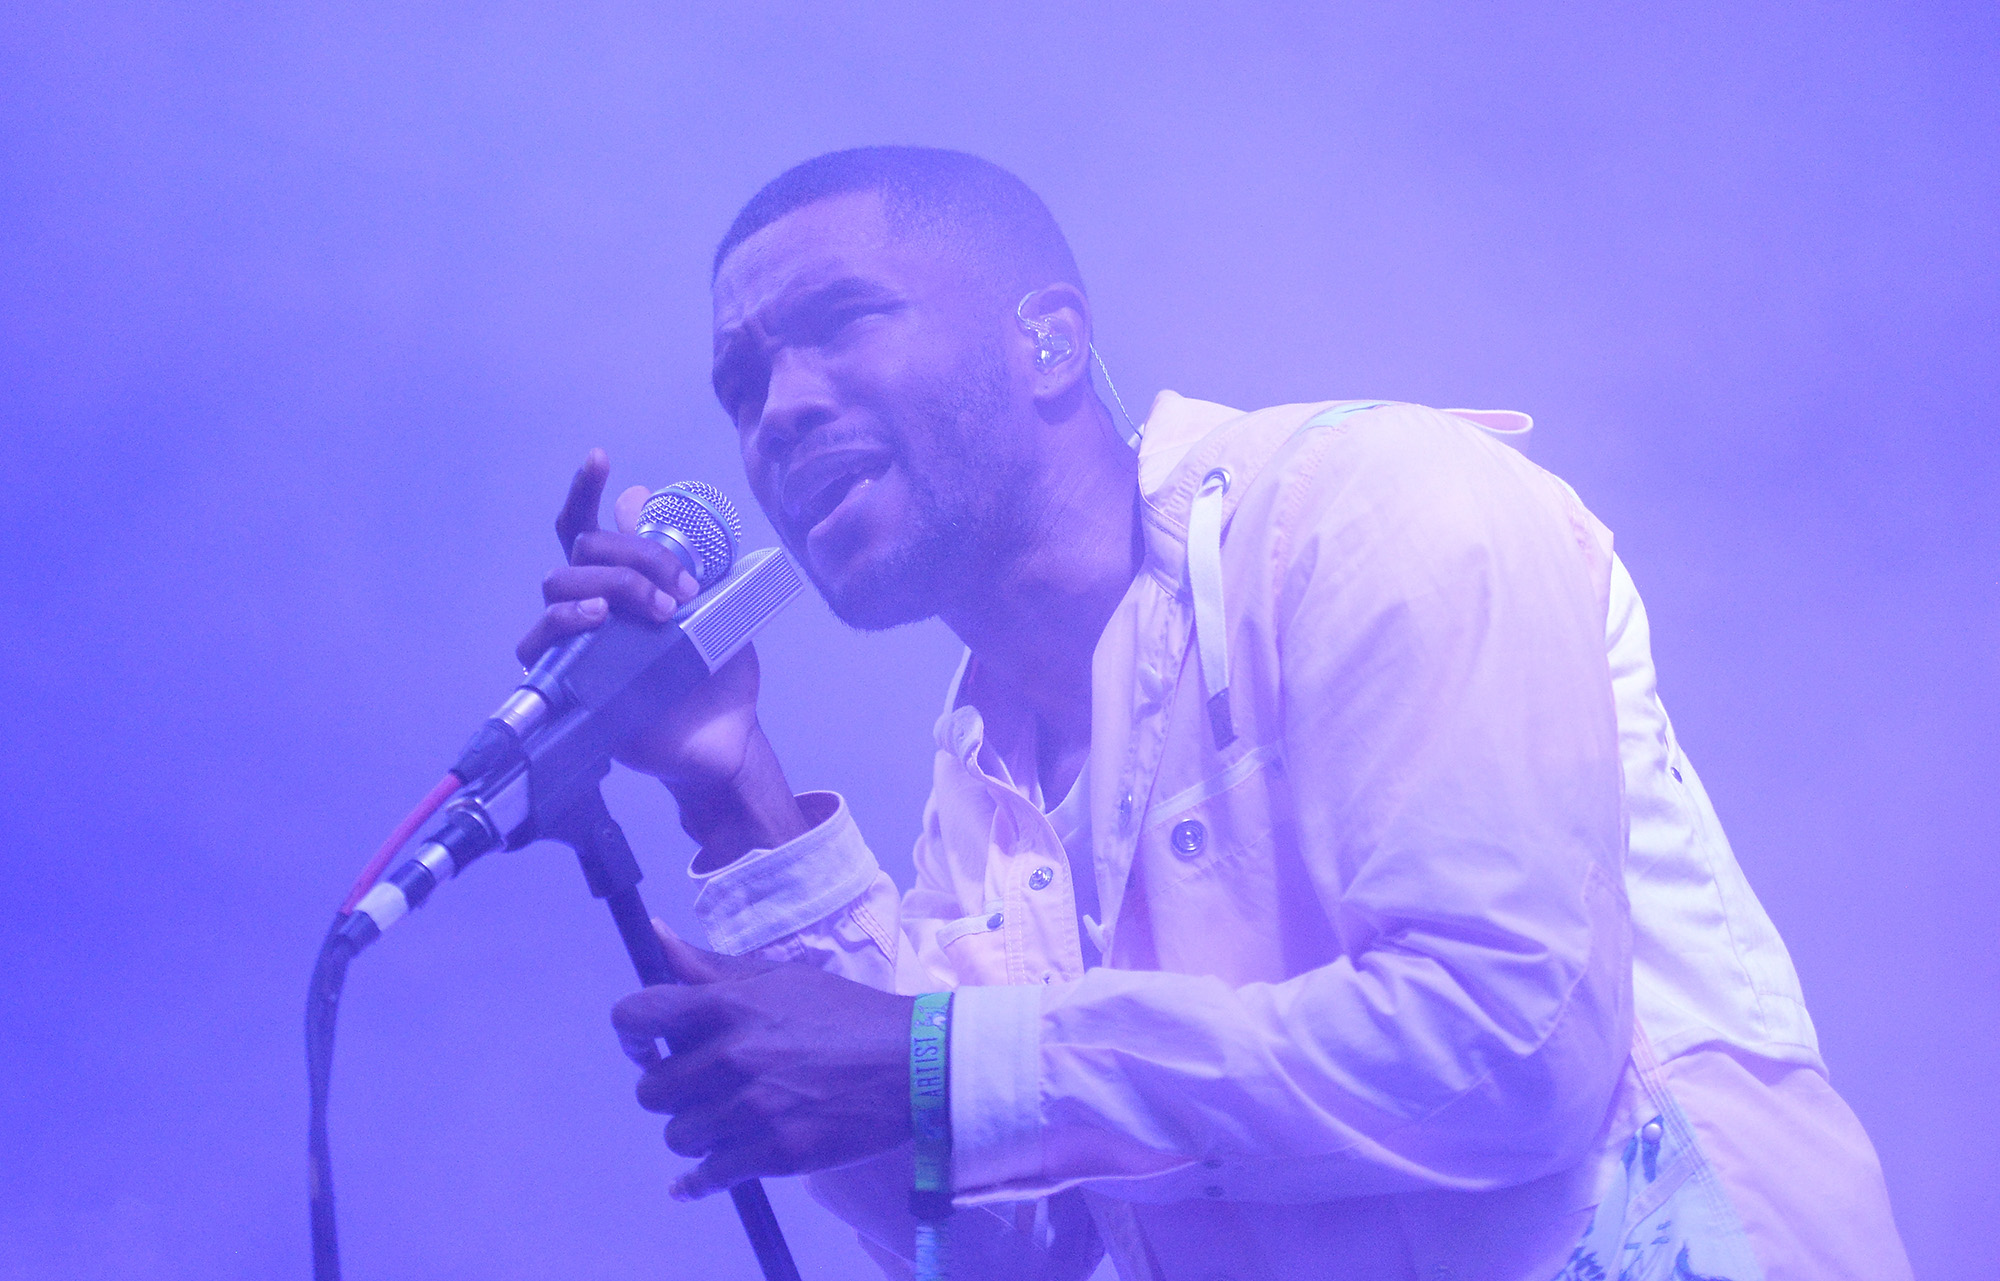 Frank Ocean performs during the 2014 Bonnaroo Music &amp; Arts Festival on June 14, 2014 in Manchester, Tennessee.  (Photo by Jason Merritt/Getty Images) (Jason Merritt&mdash;Getty Images)